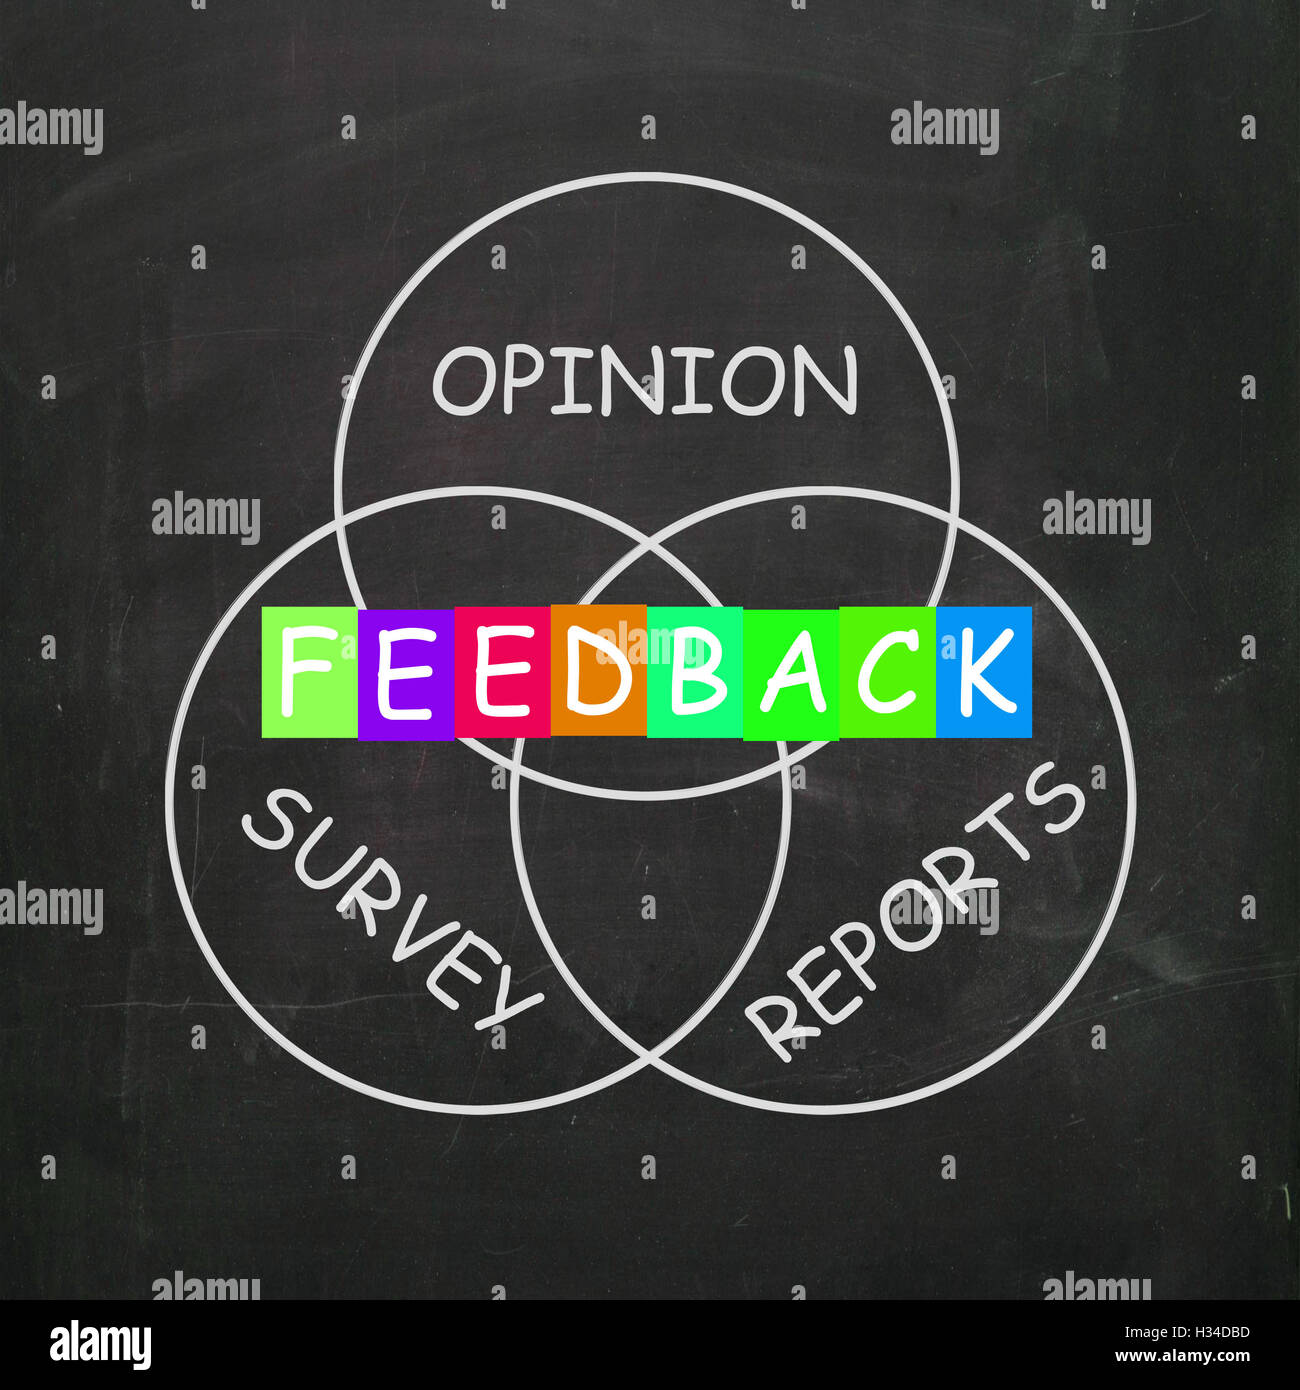 Feedback Gives Reports and Surveys of Opinions Stock Photo